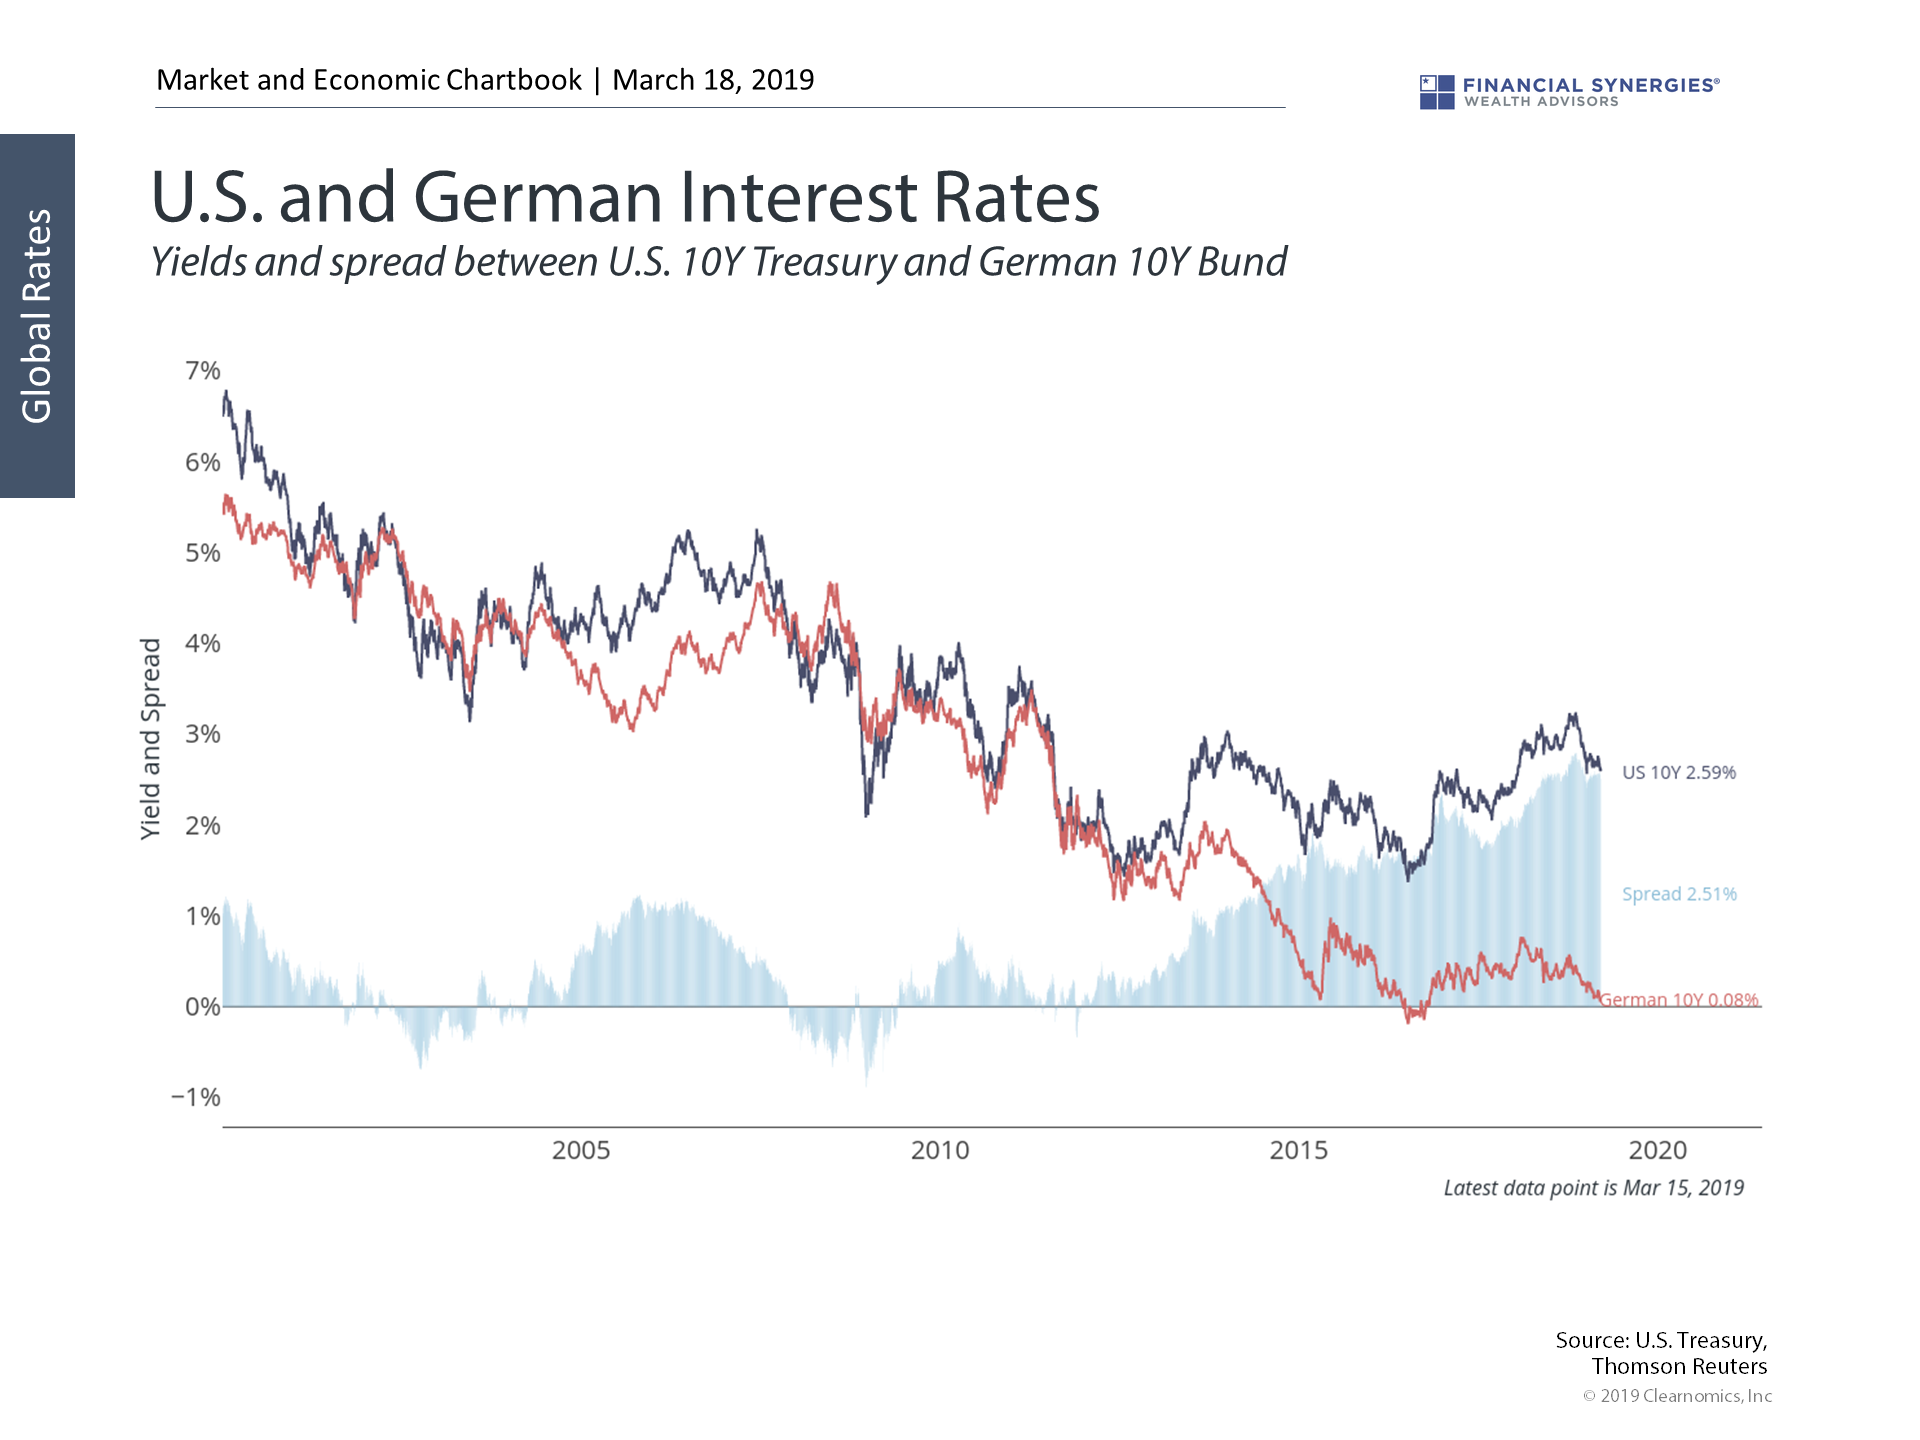 US and German Interest Rates